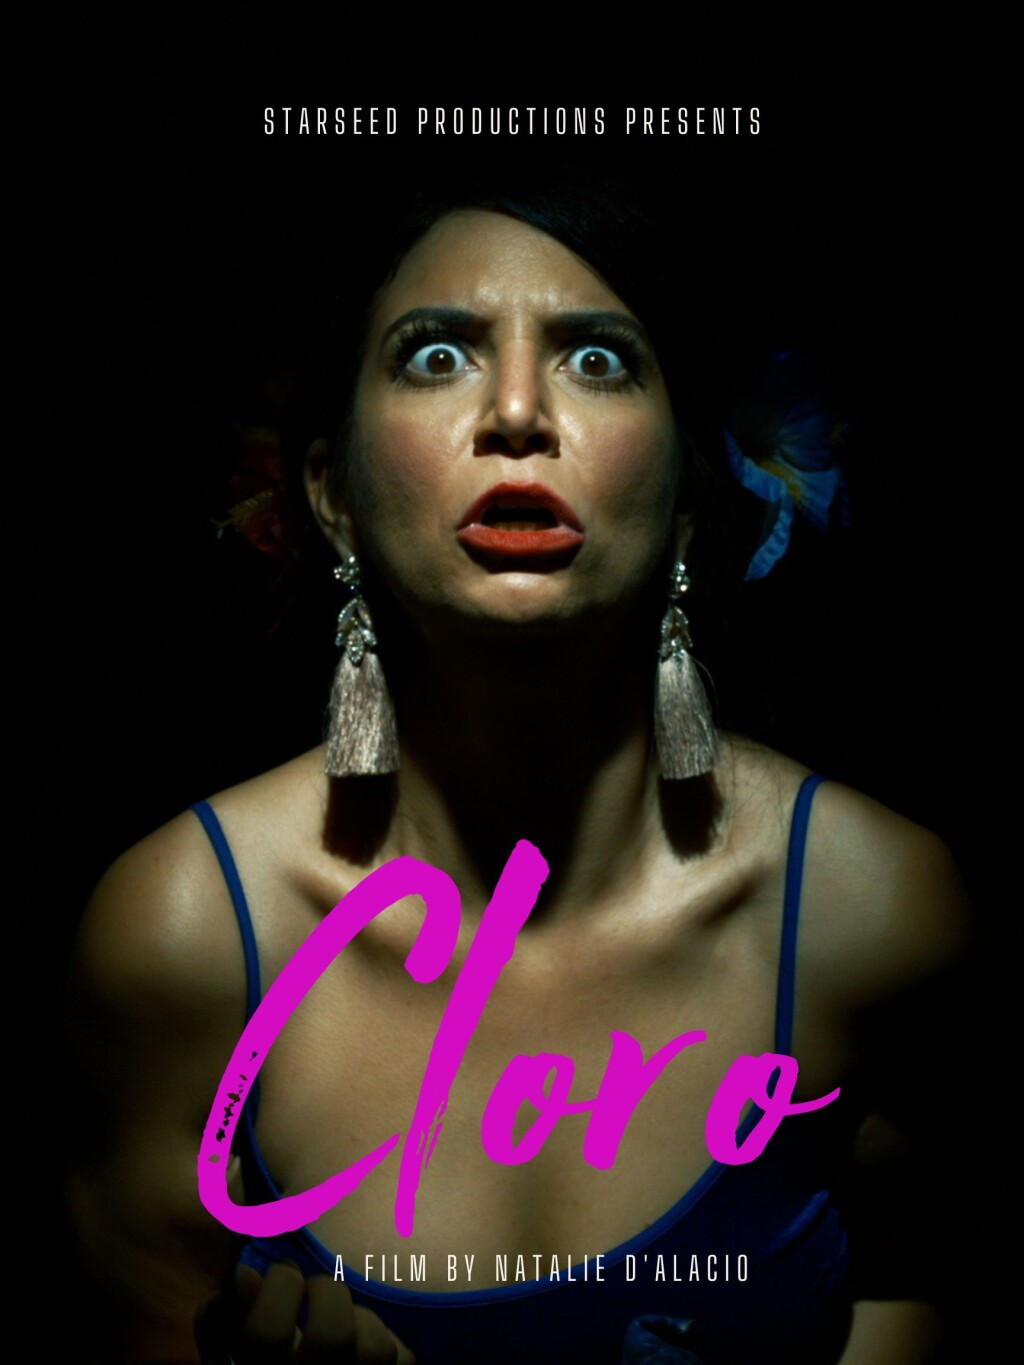 Filmposter for Cloro